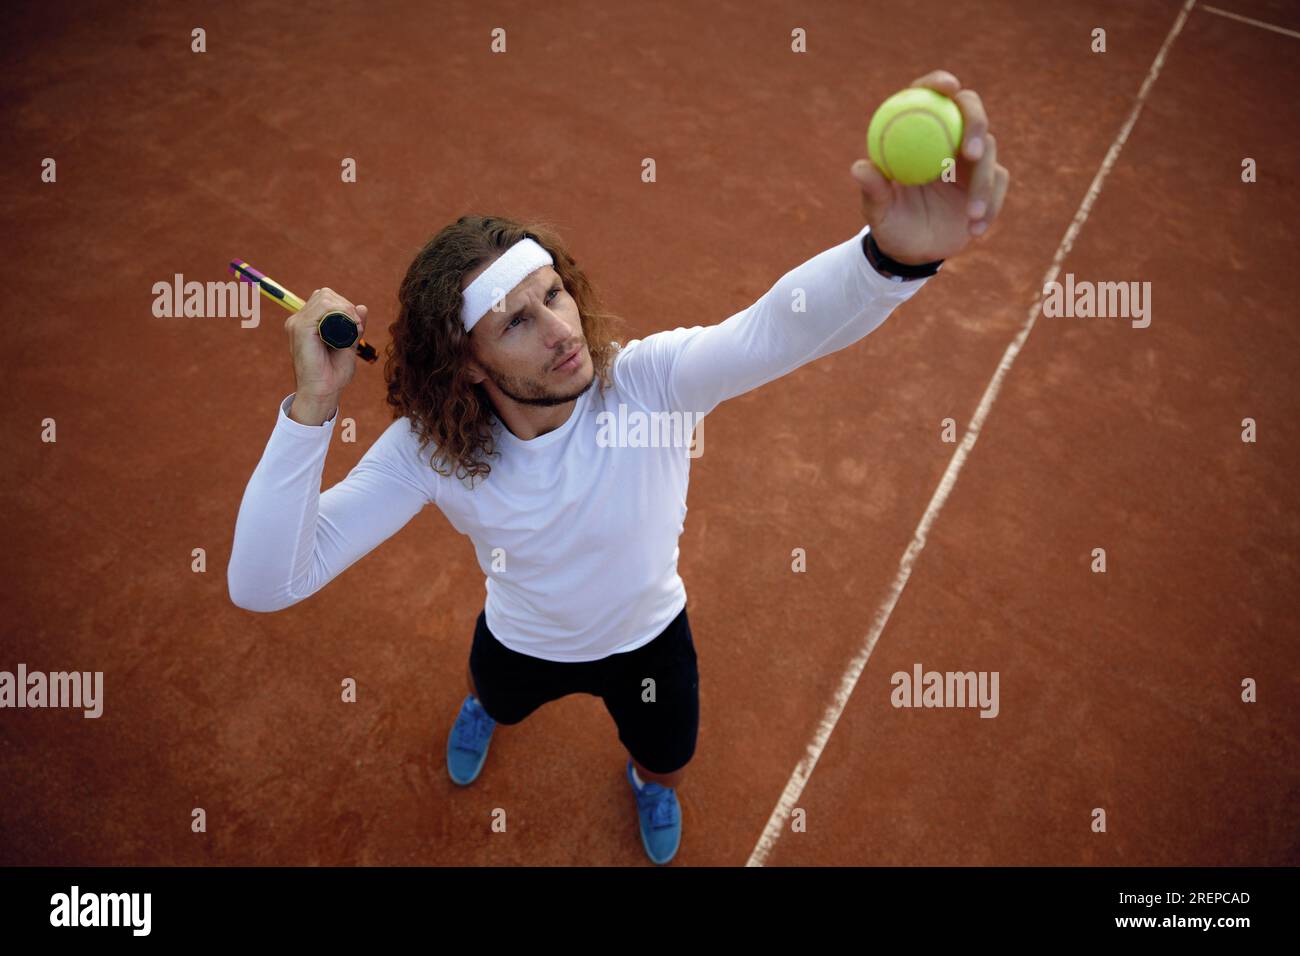 High angel view on man tennis player serving ball Stock Photo